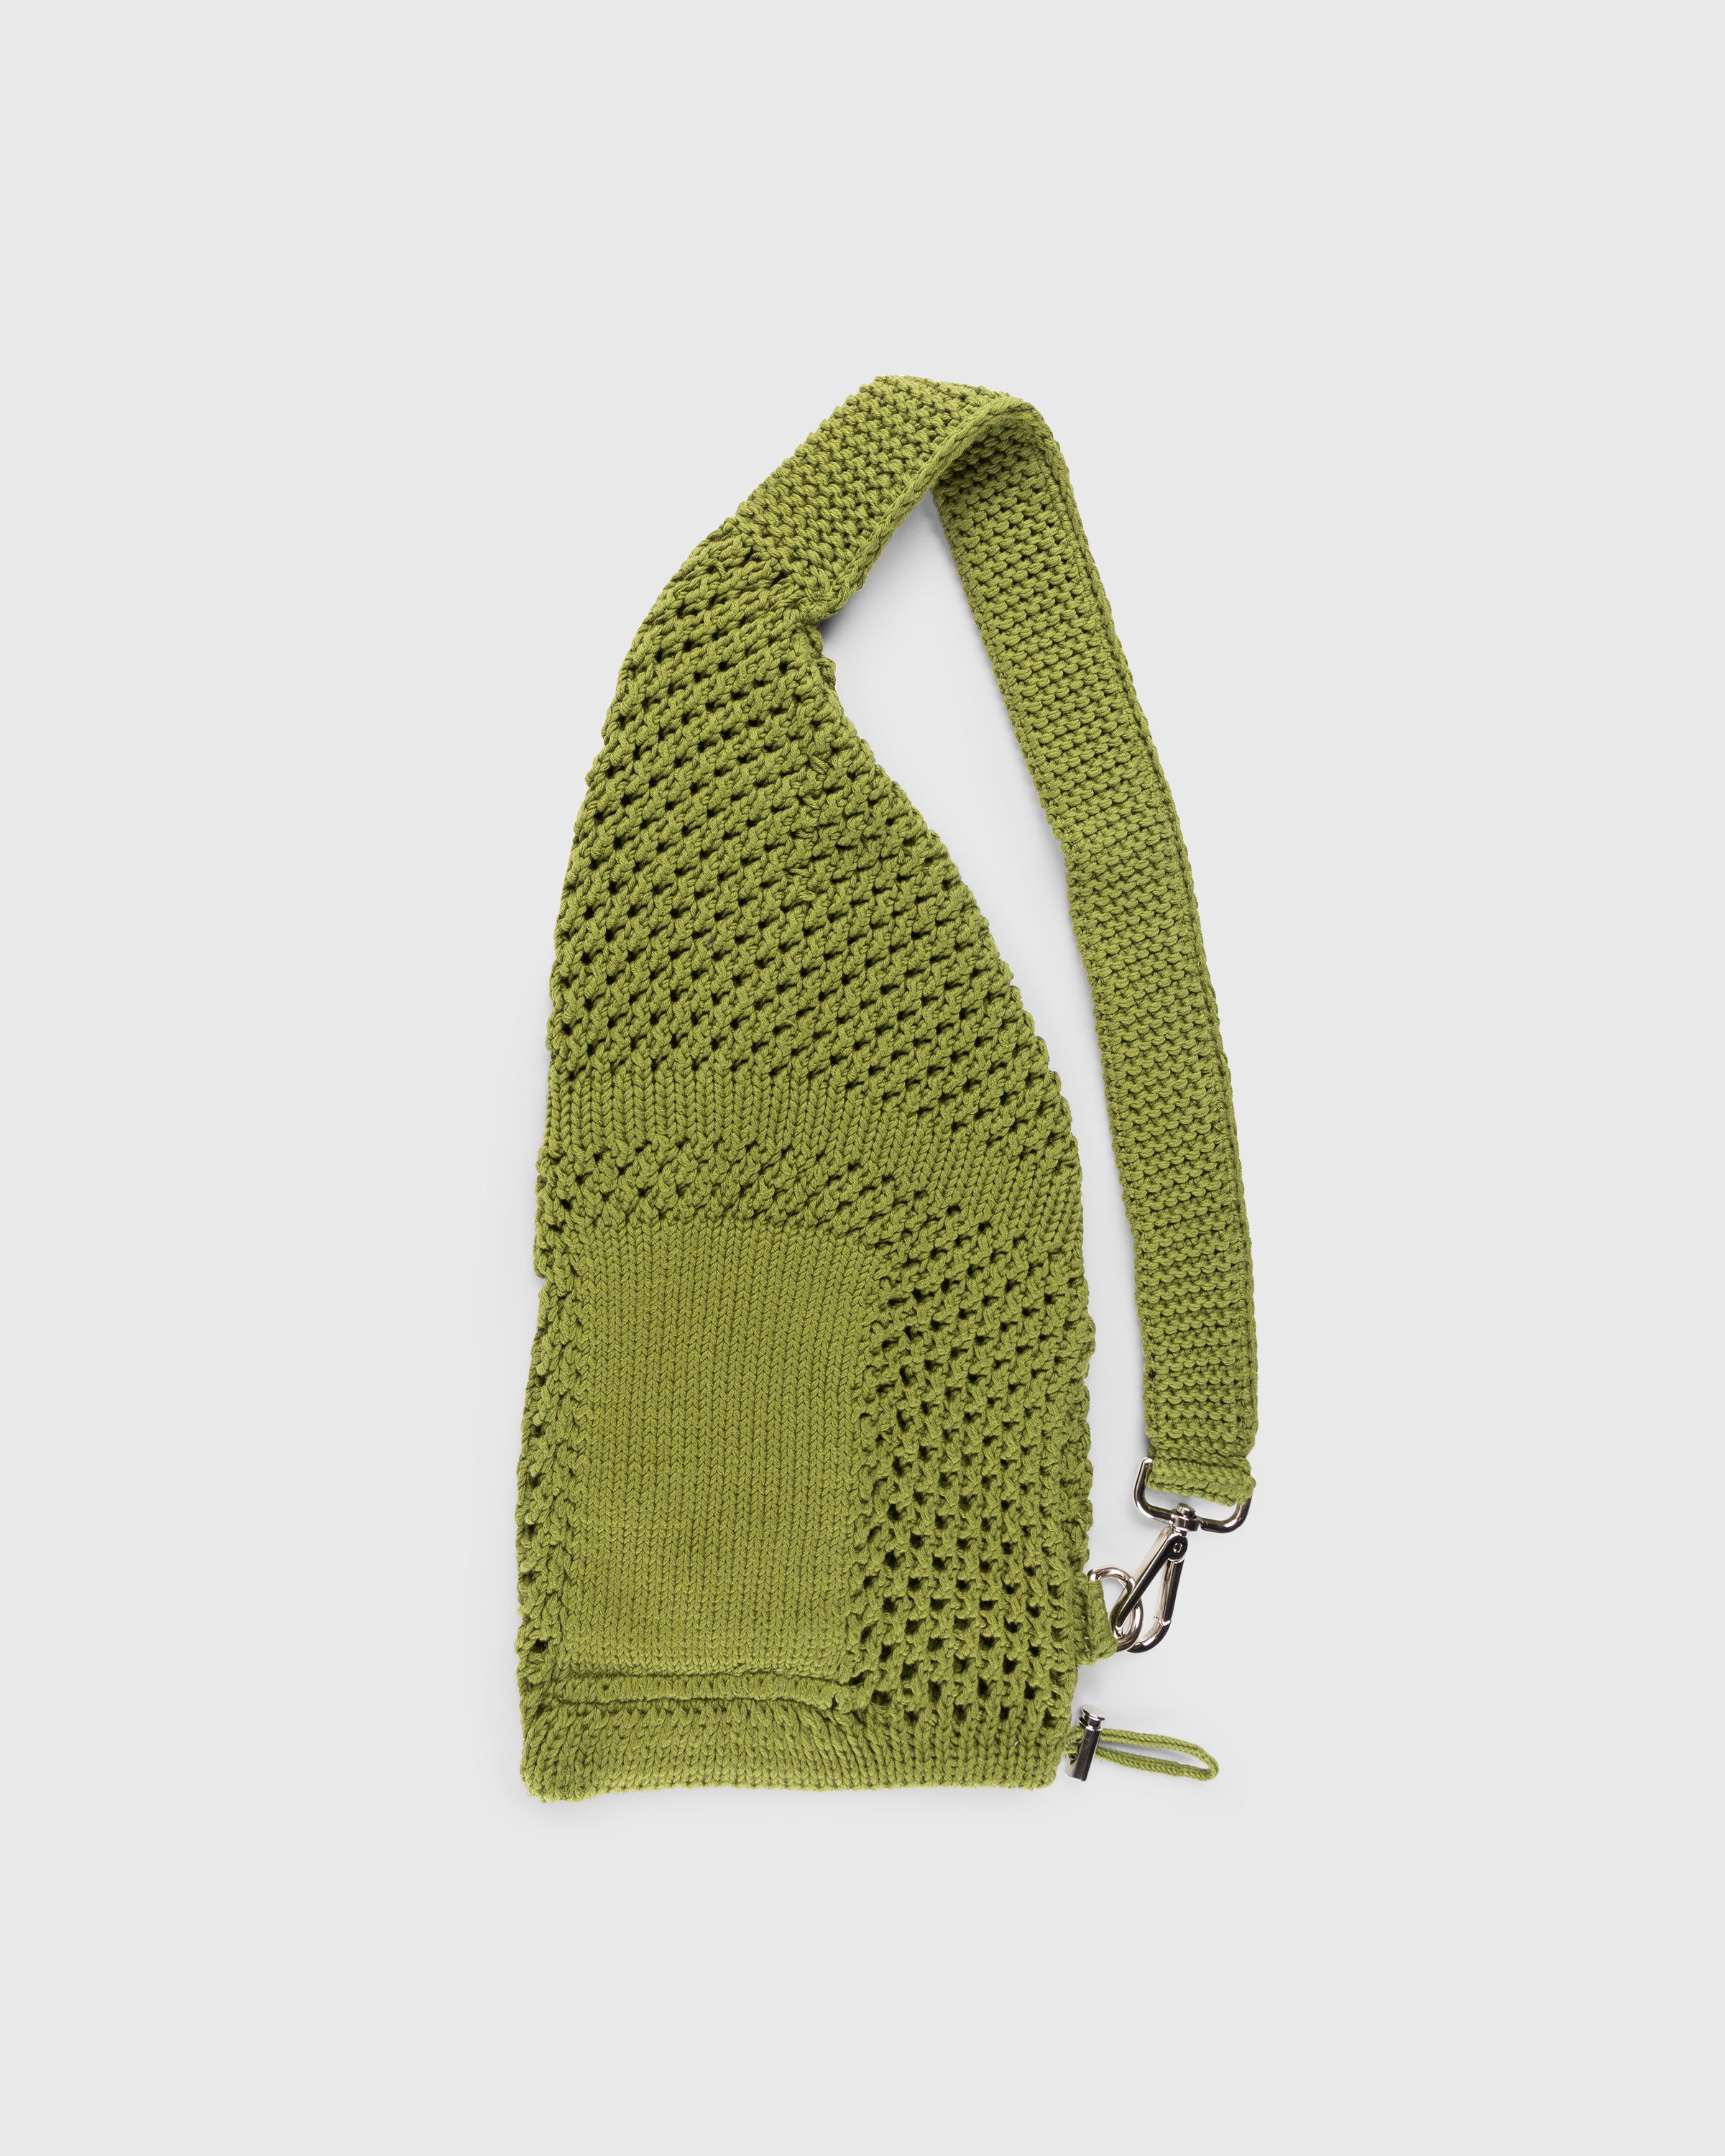 SSU - Mesh Stitch Knitted Bag Olive Green - Accessories - Green - Image 1